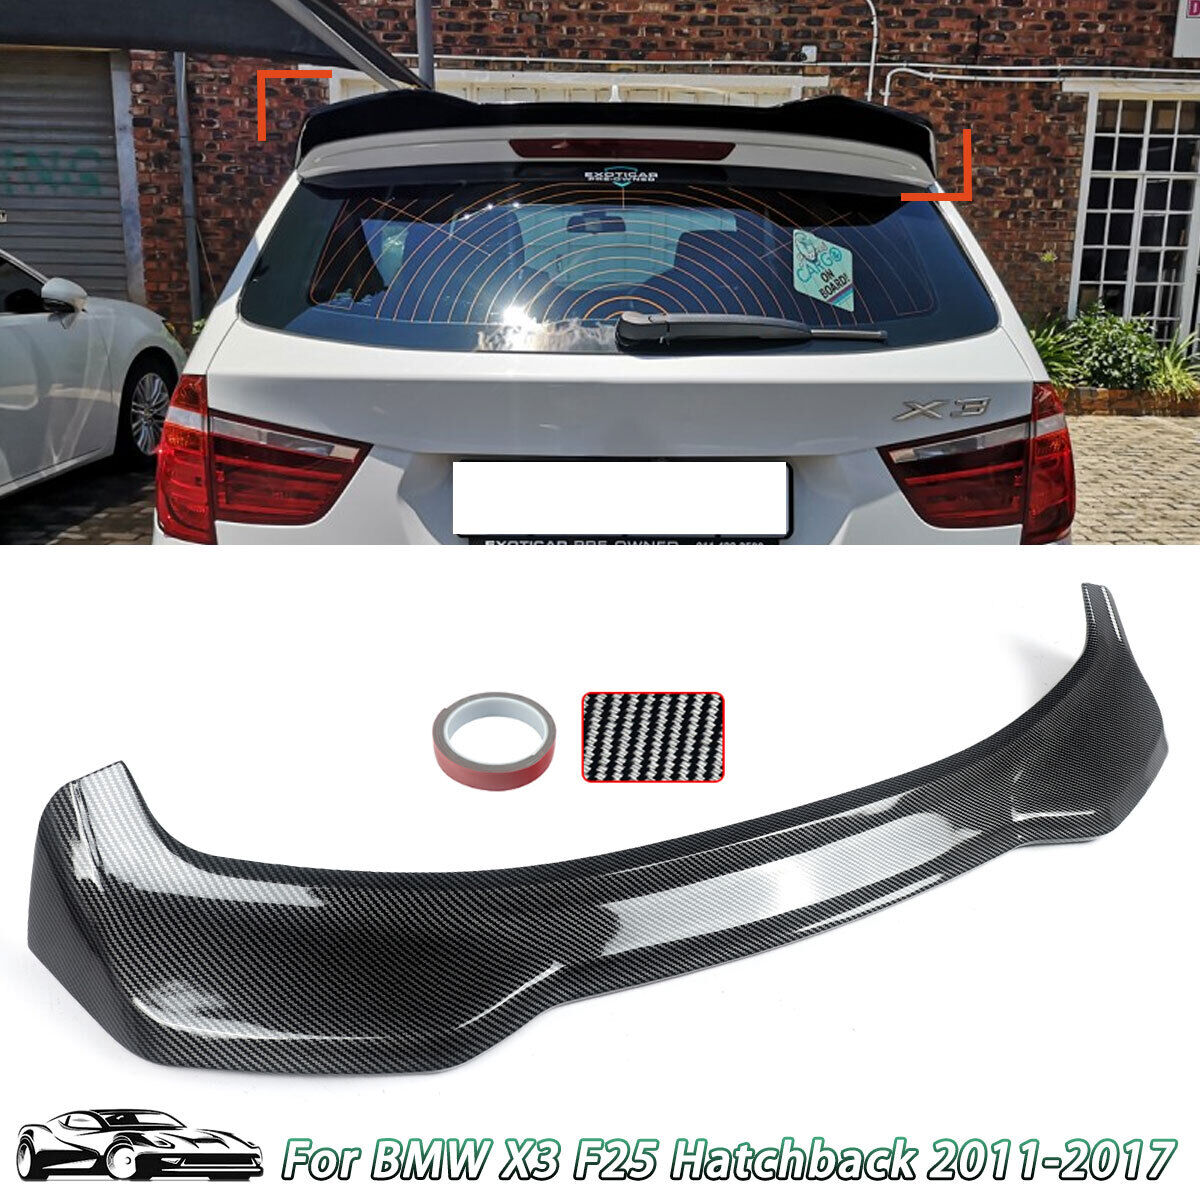 X3M Style Rear Tailgate Spoiler Roof For BMW X3 F25 M40i Lip Carbon Look 11-2017